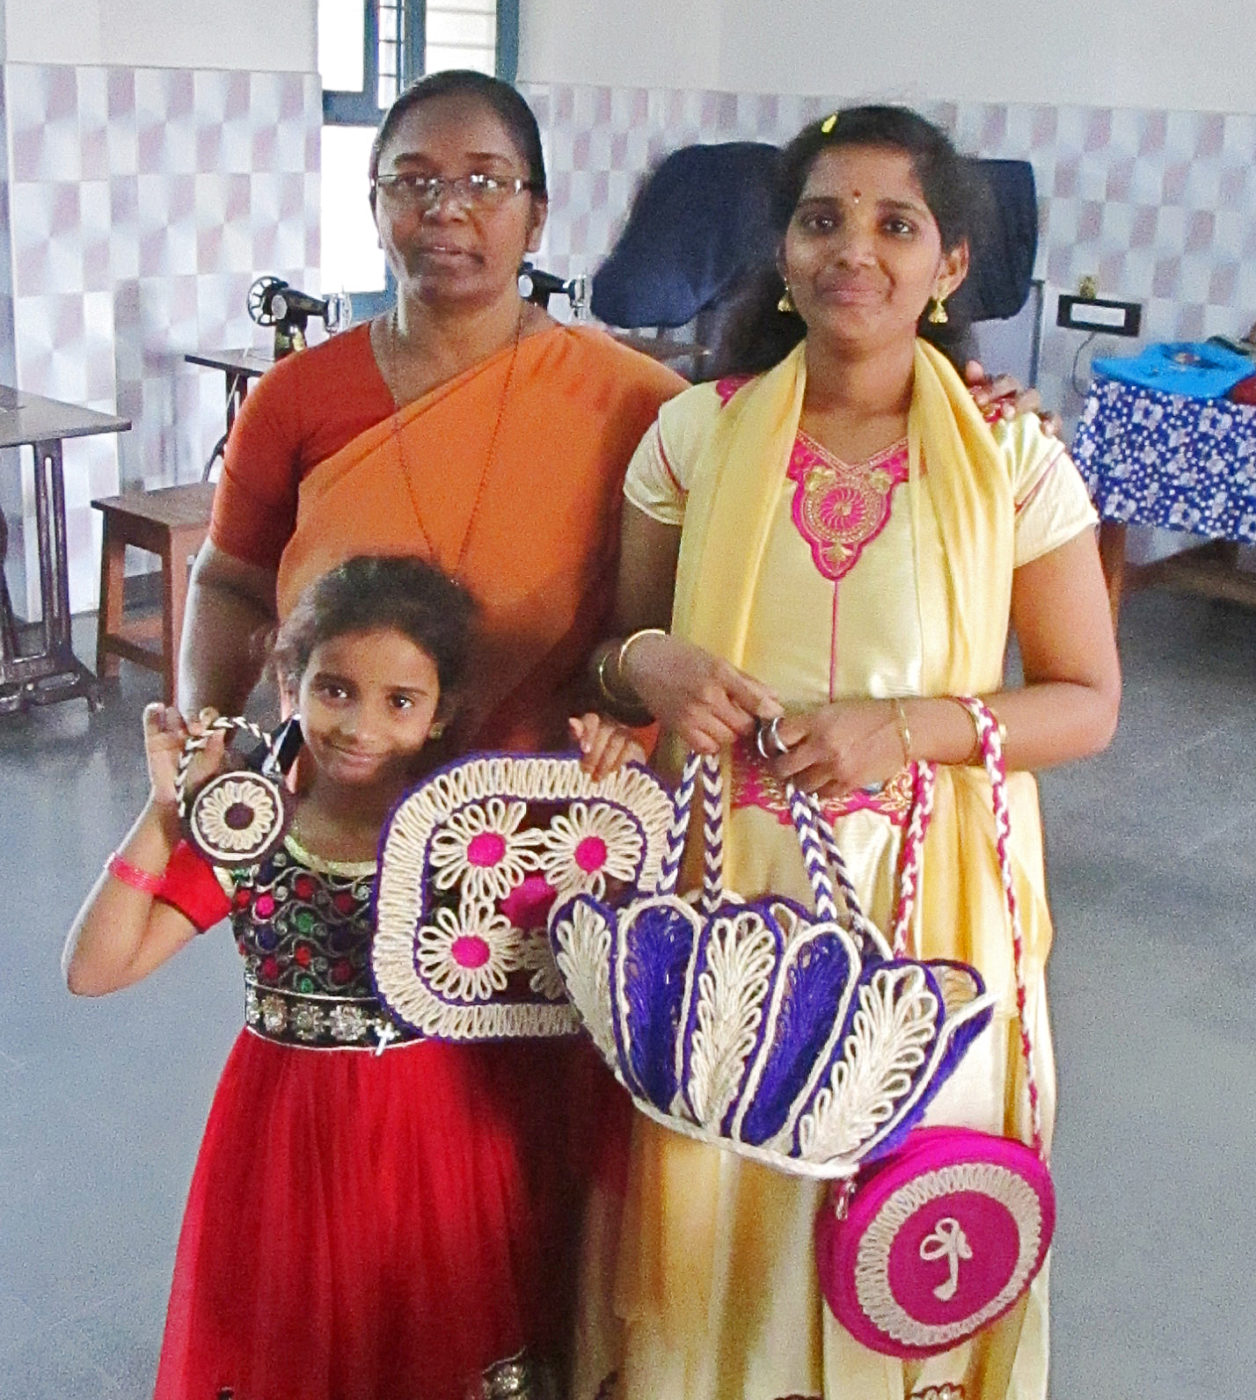 Keerthana has written her own success story, and now she is inspiring other girls to do the same.